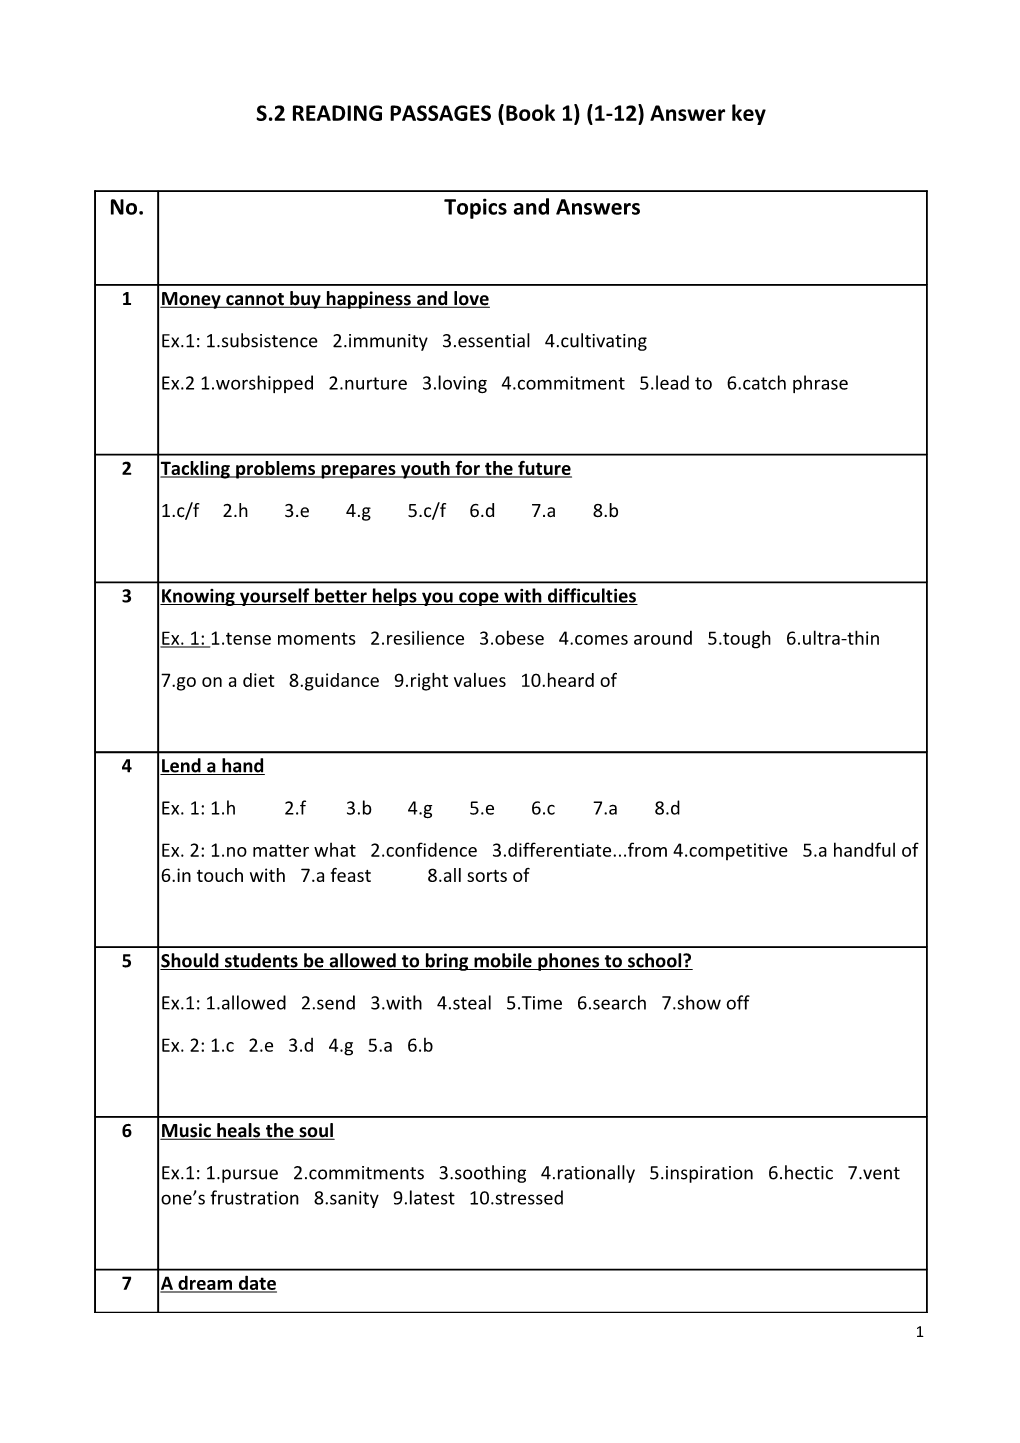 S.2 READING PASSAGES(Book 1) (1-12) Answer Key